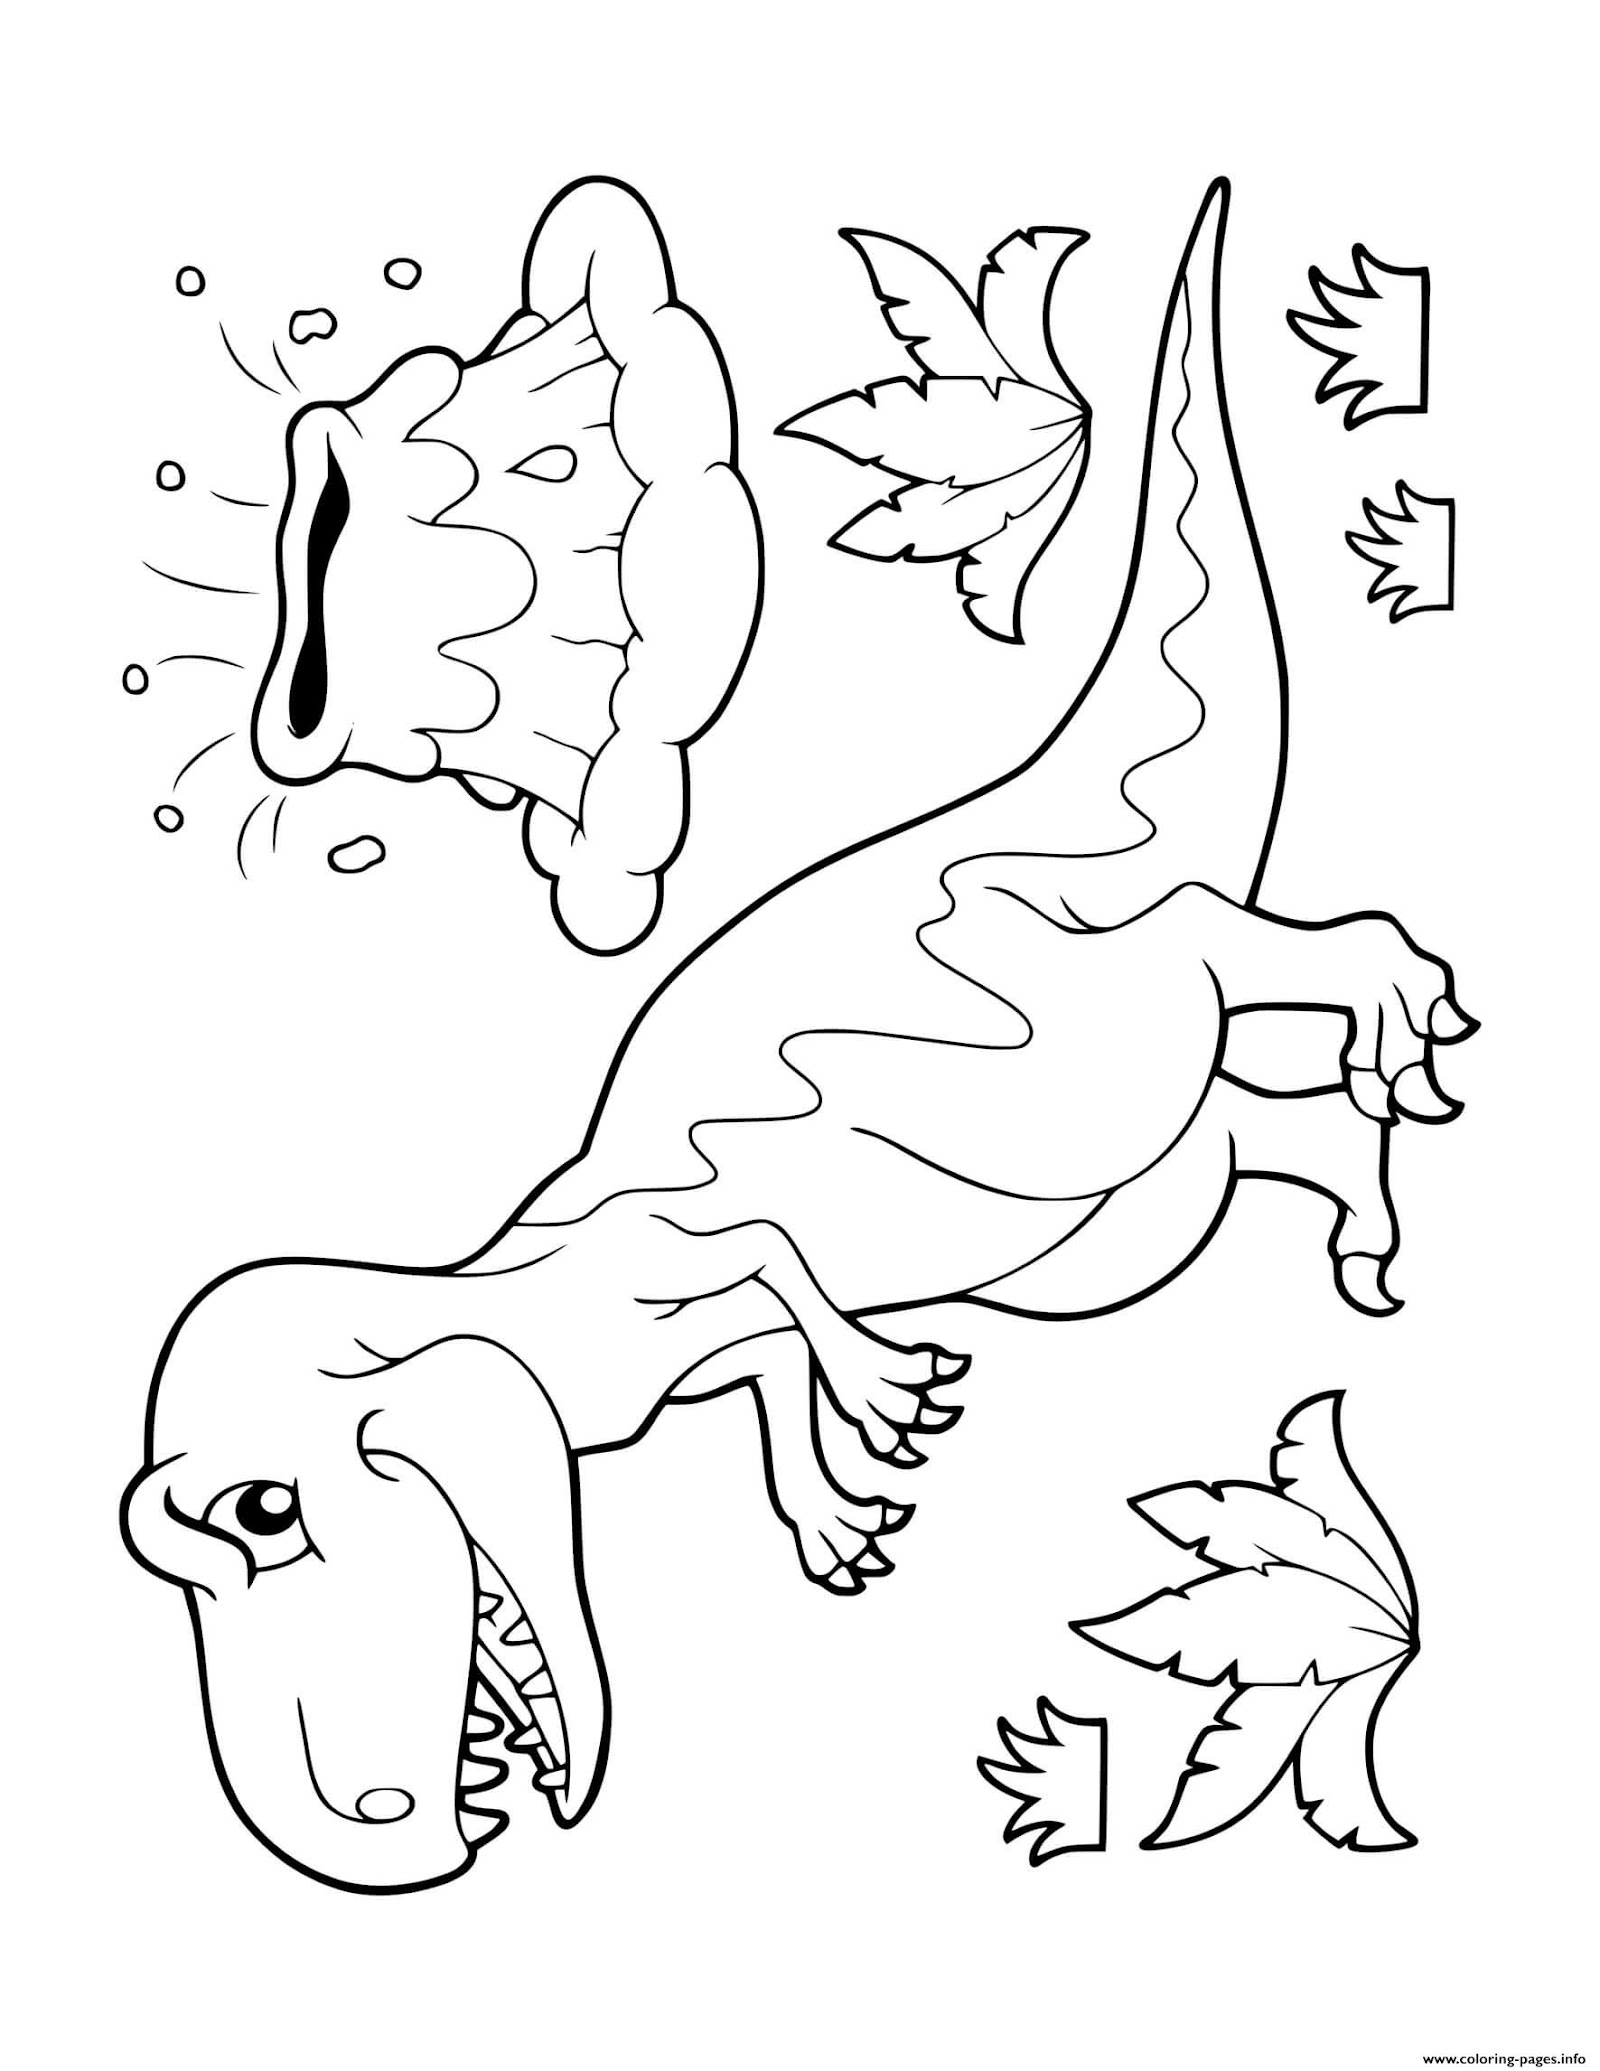 Download 38+ Dinosaur Cartoon For Kids Printable Free Coloring Pages ...